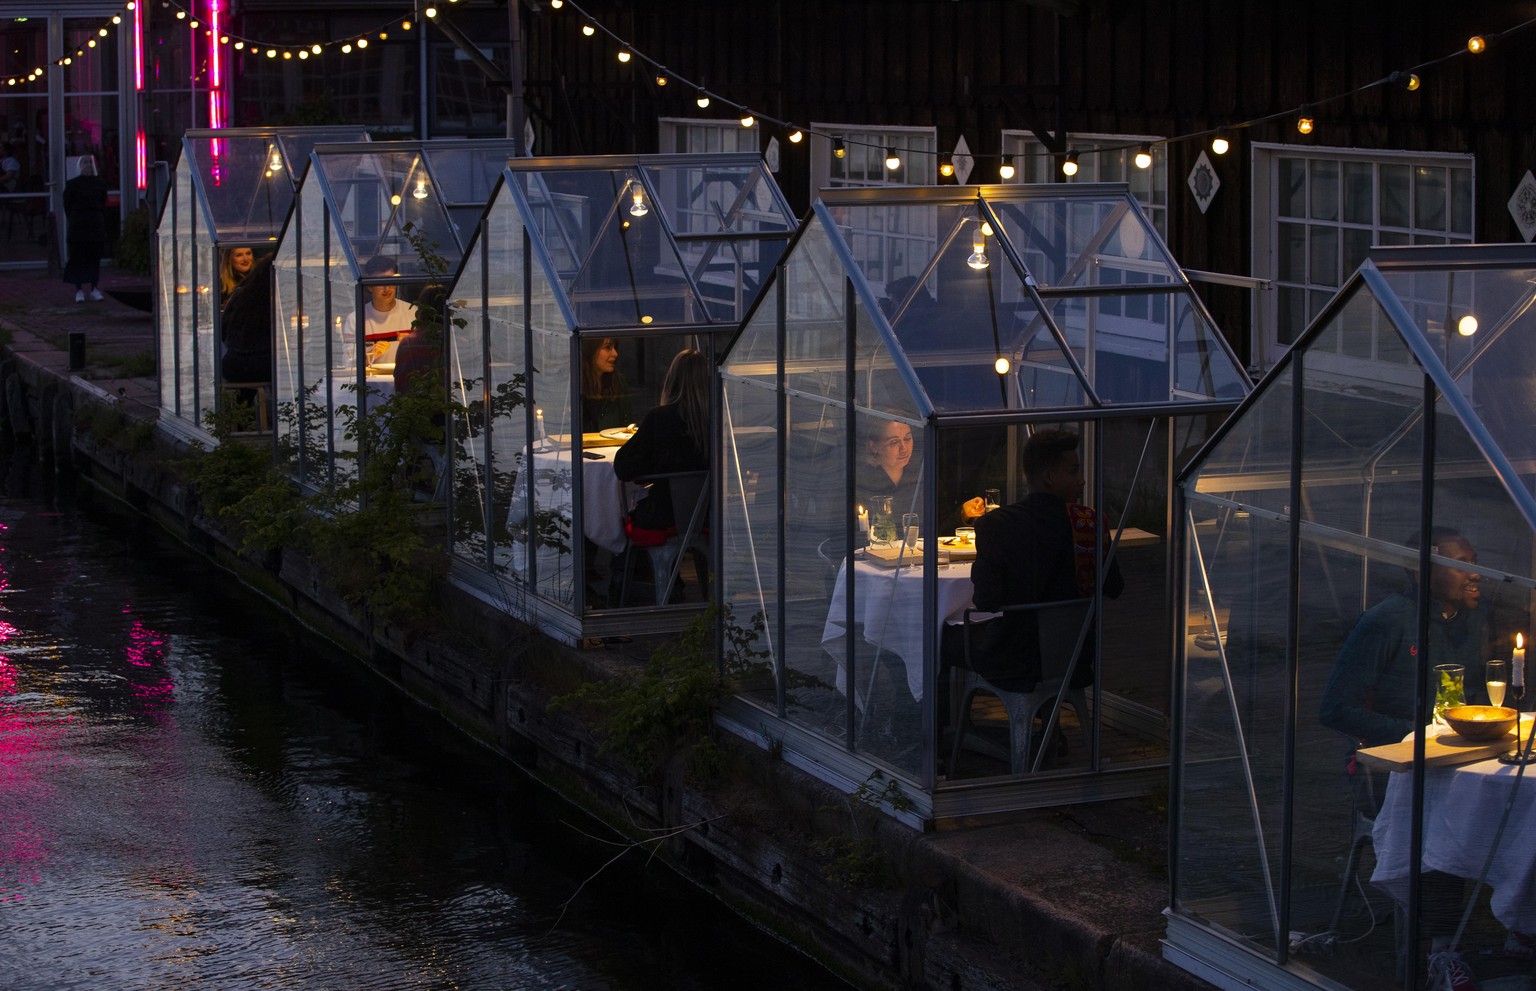 FILE - In this May 5, 2020 file photo, staff at the Mediamatic restaurant serve food to volunteers seated in small glasshouses during a try-out of a setup which respects social distancing abiding by g ...